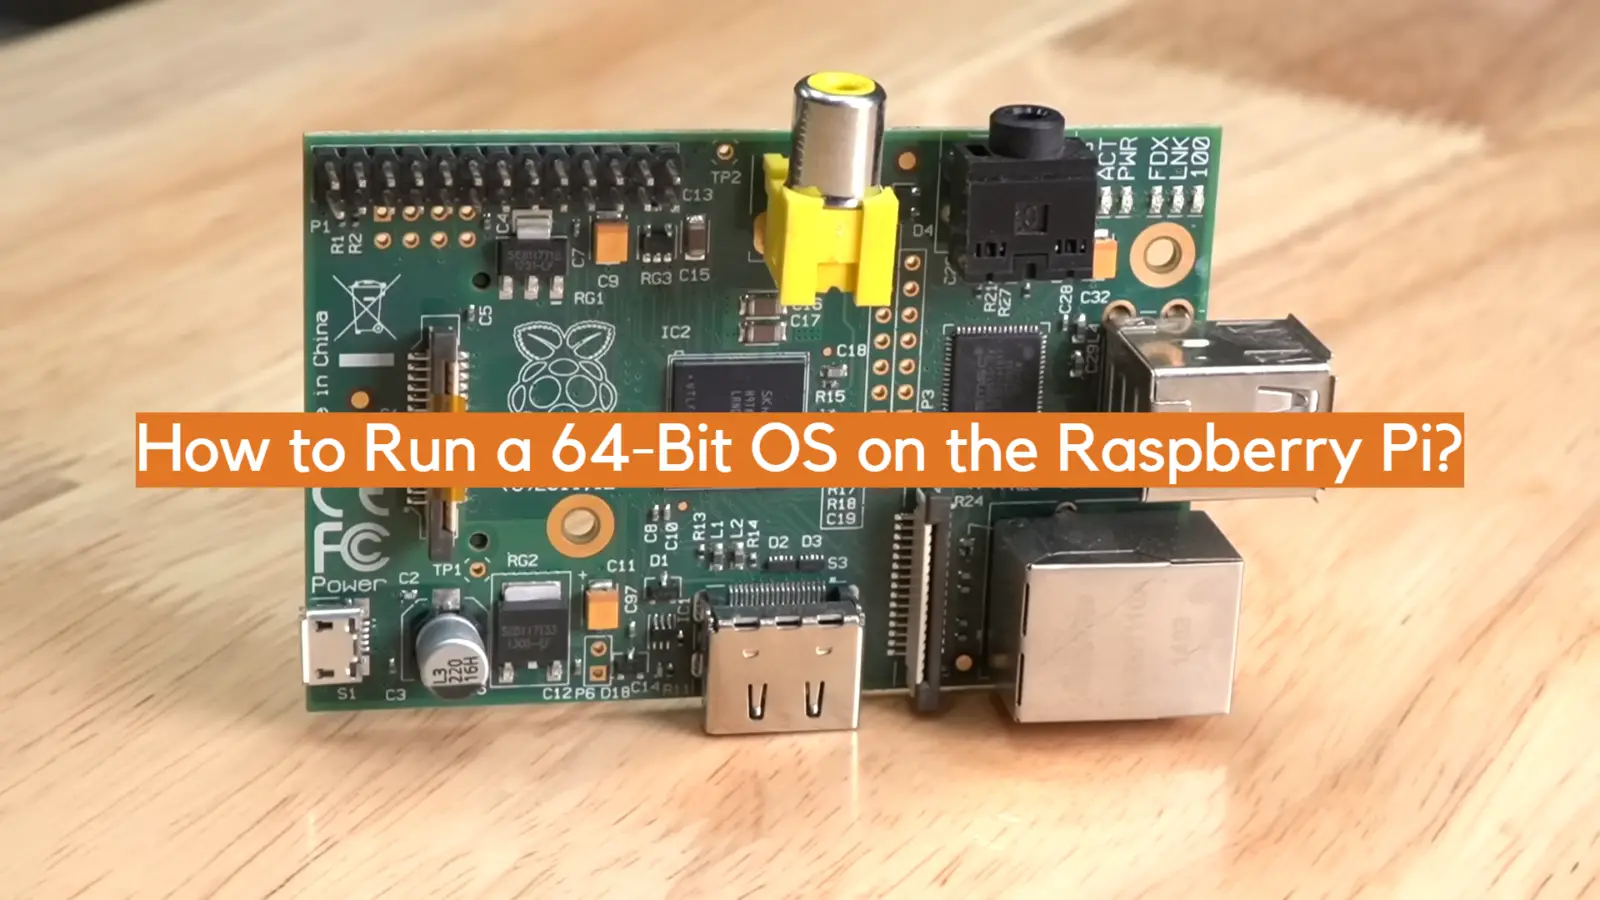 How to Run a 64-Bit OS on the Raspberry Pi?